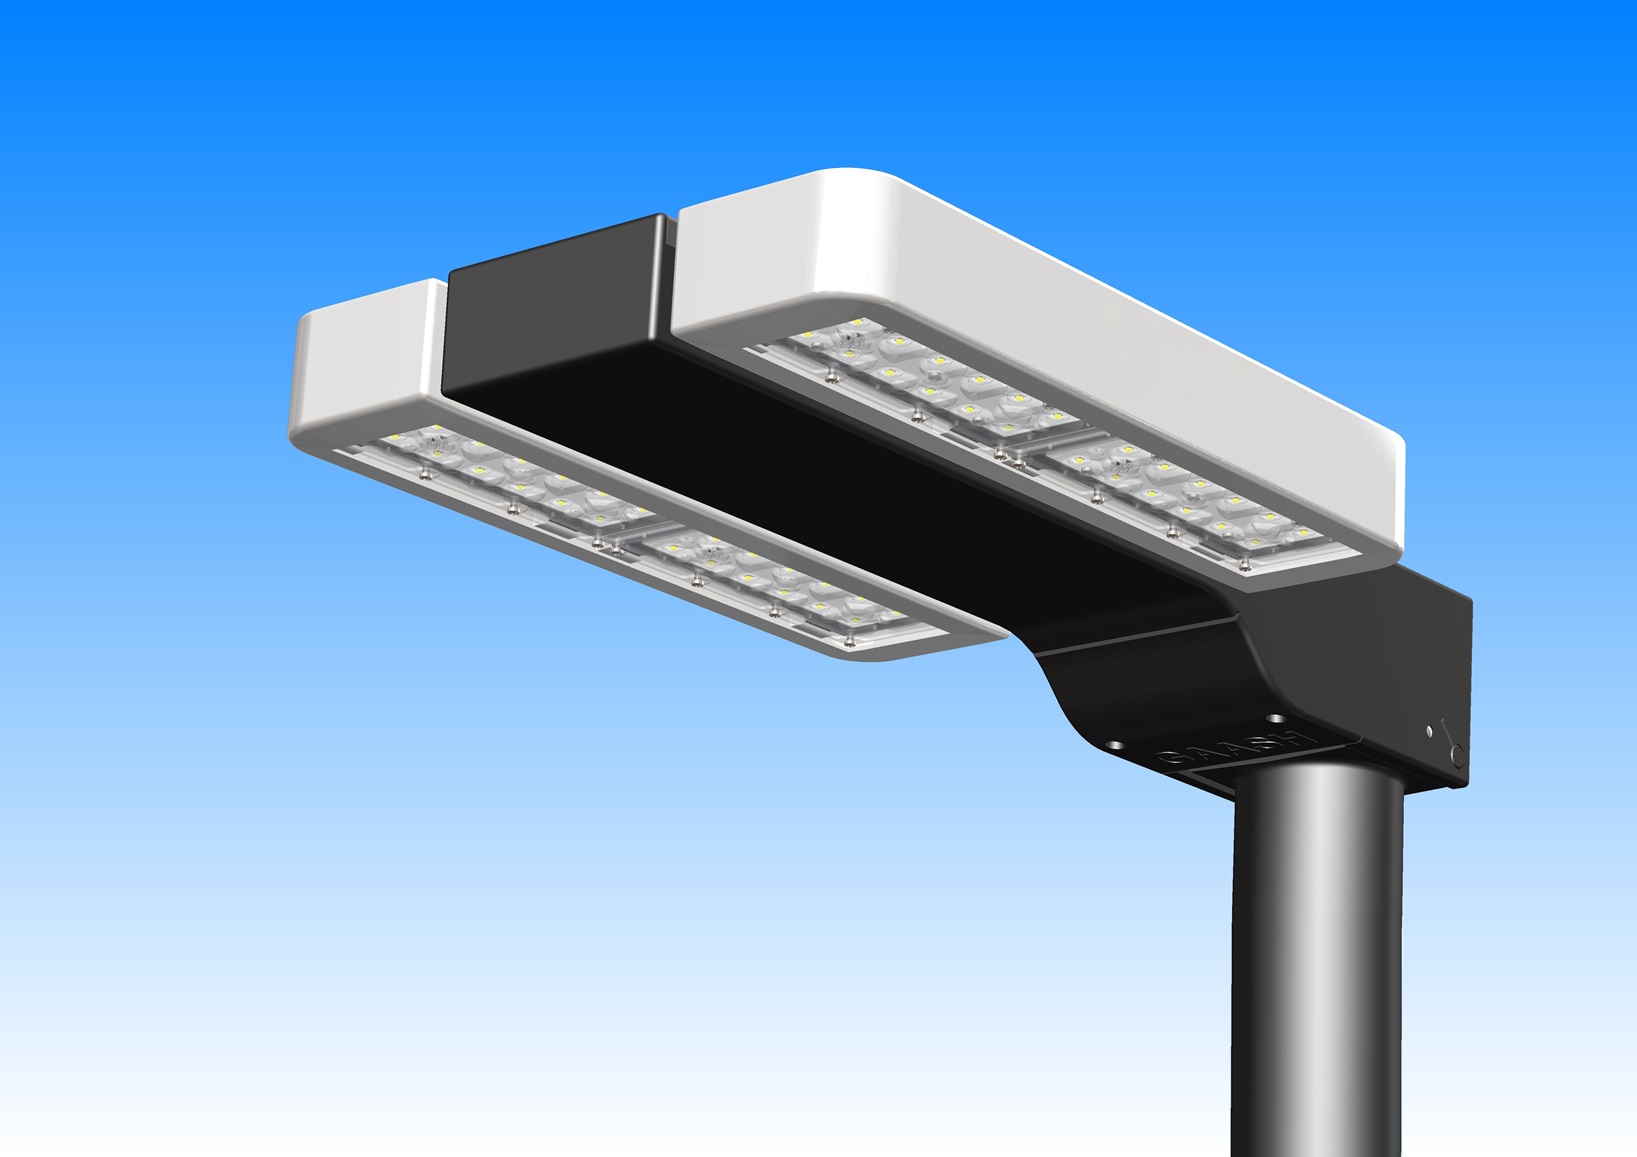 Apollo luminaires from Gaash Lighting are an answer to demands for smart city, safe city and IoT trends worldwide. Photo: courtesy